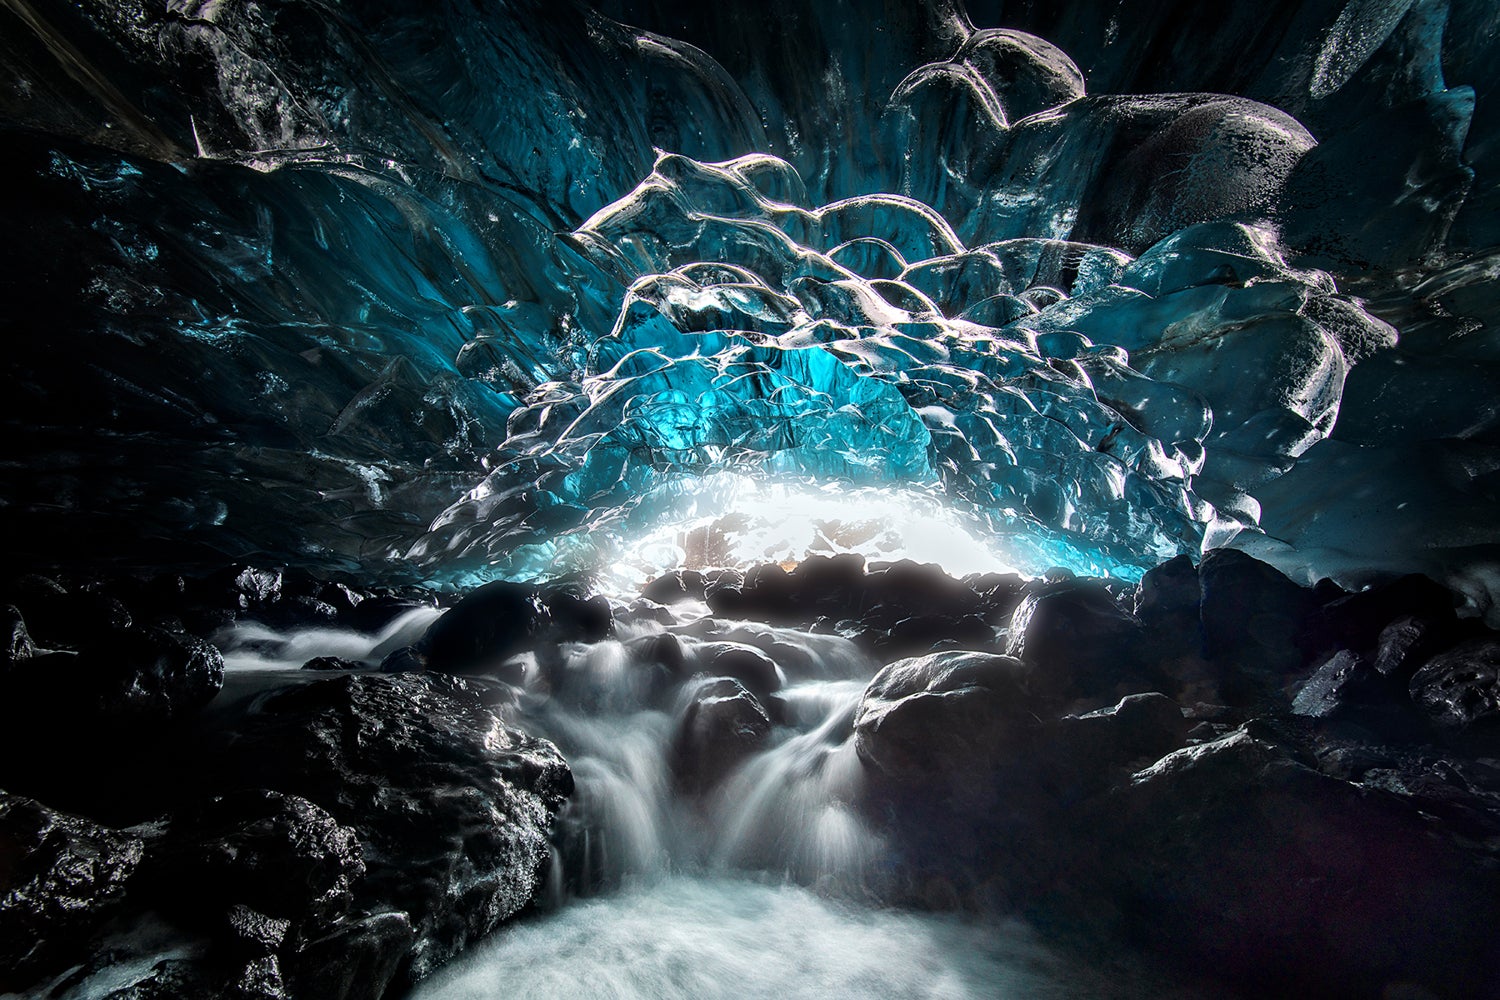 Wall Mural Photo | Cave Glacier Wallpaper Blue Order now